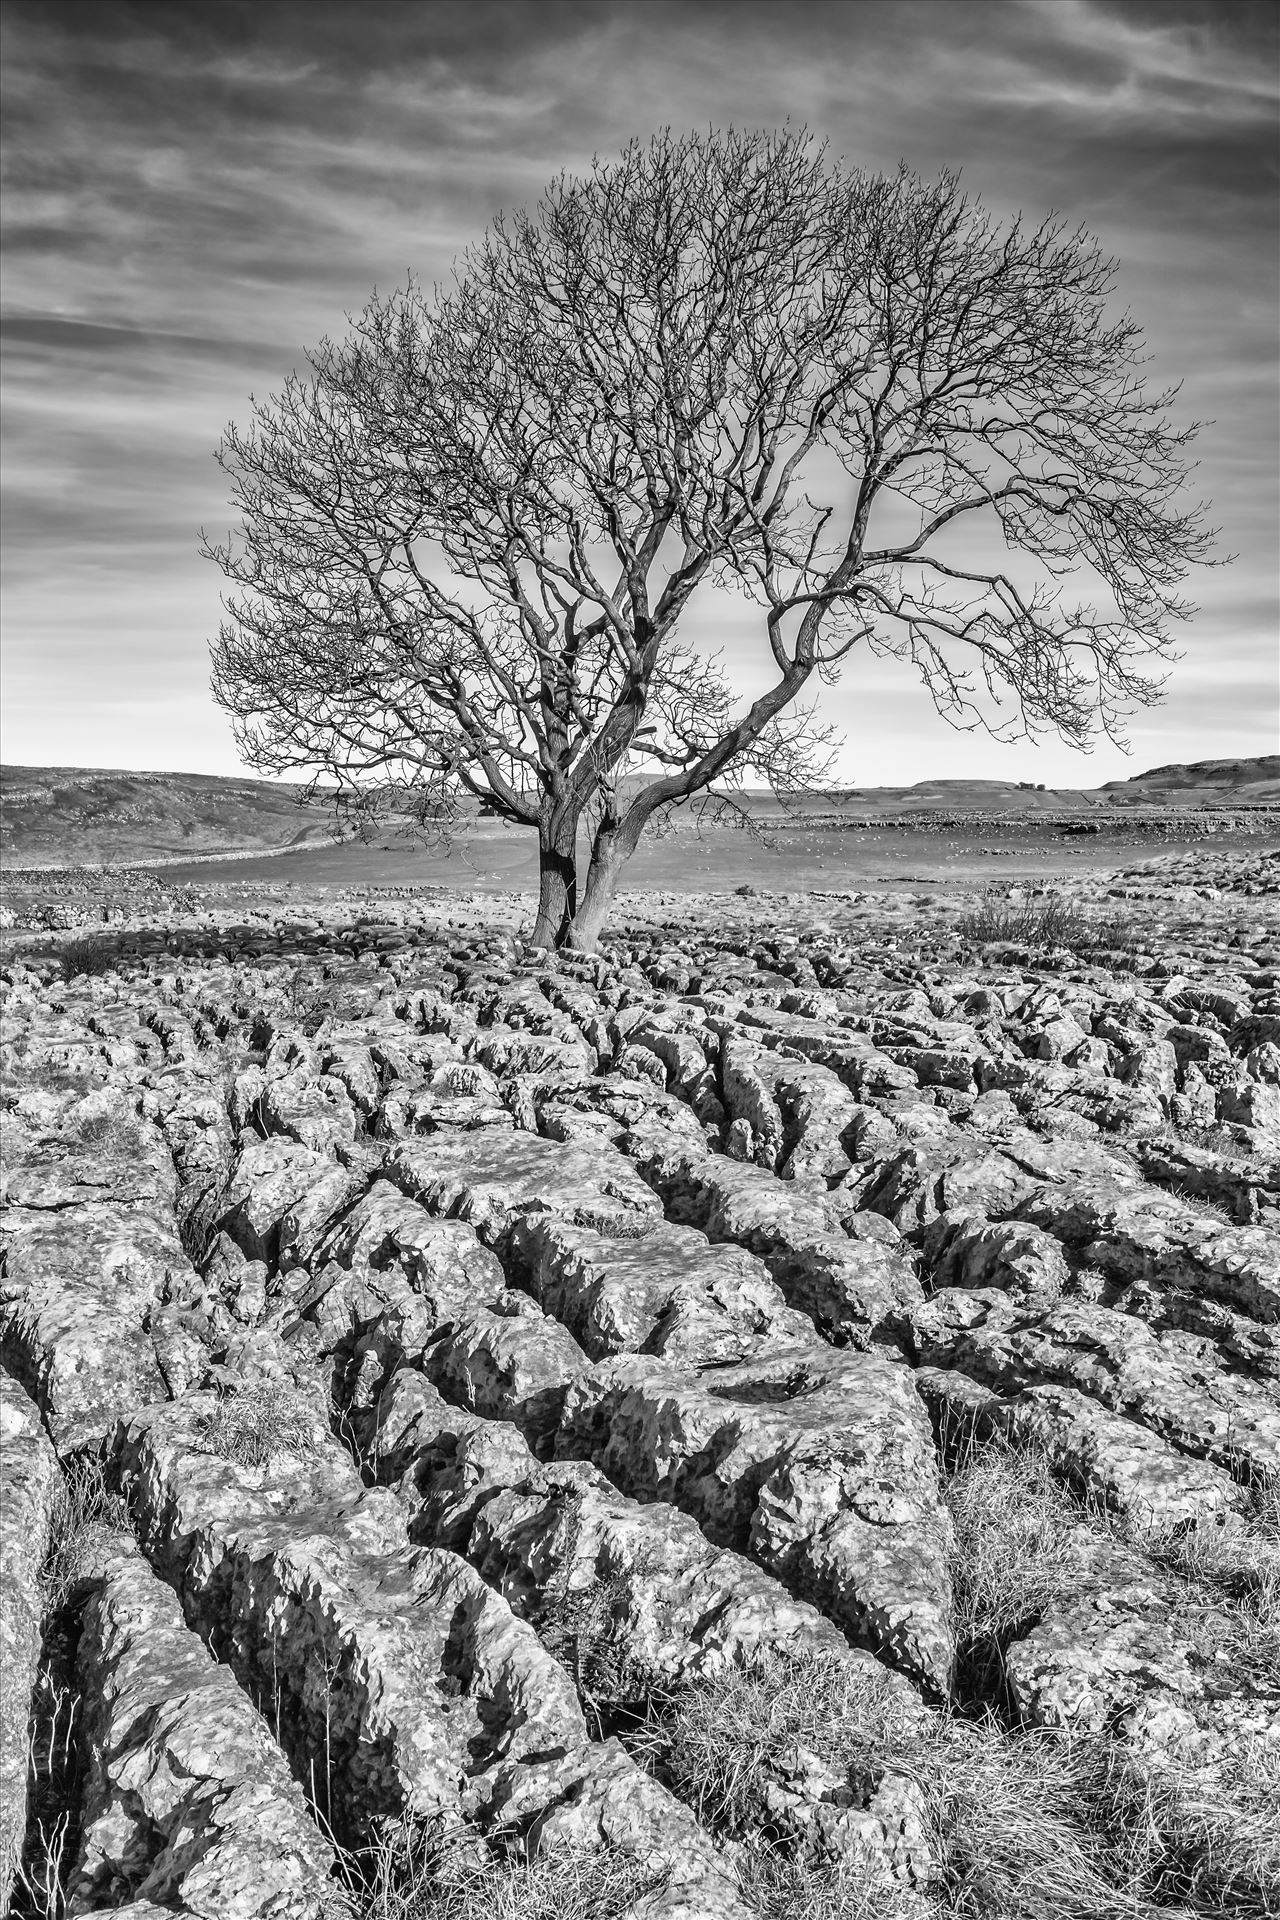 The Lone Tree nr Malham (also available in colour) - Known as 